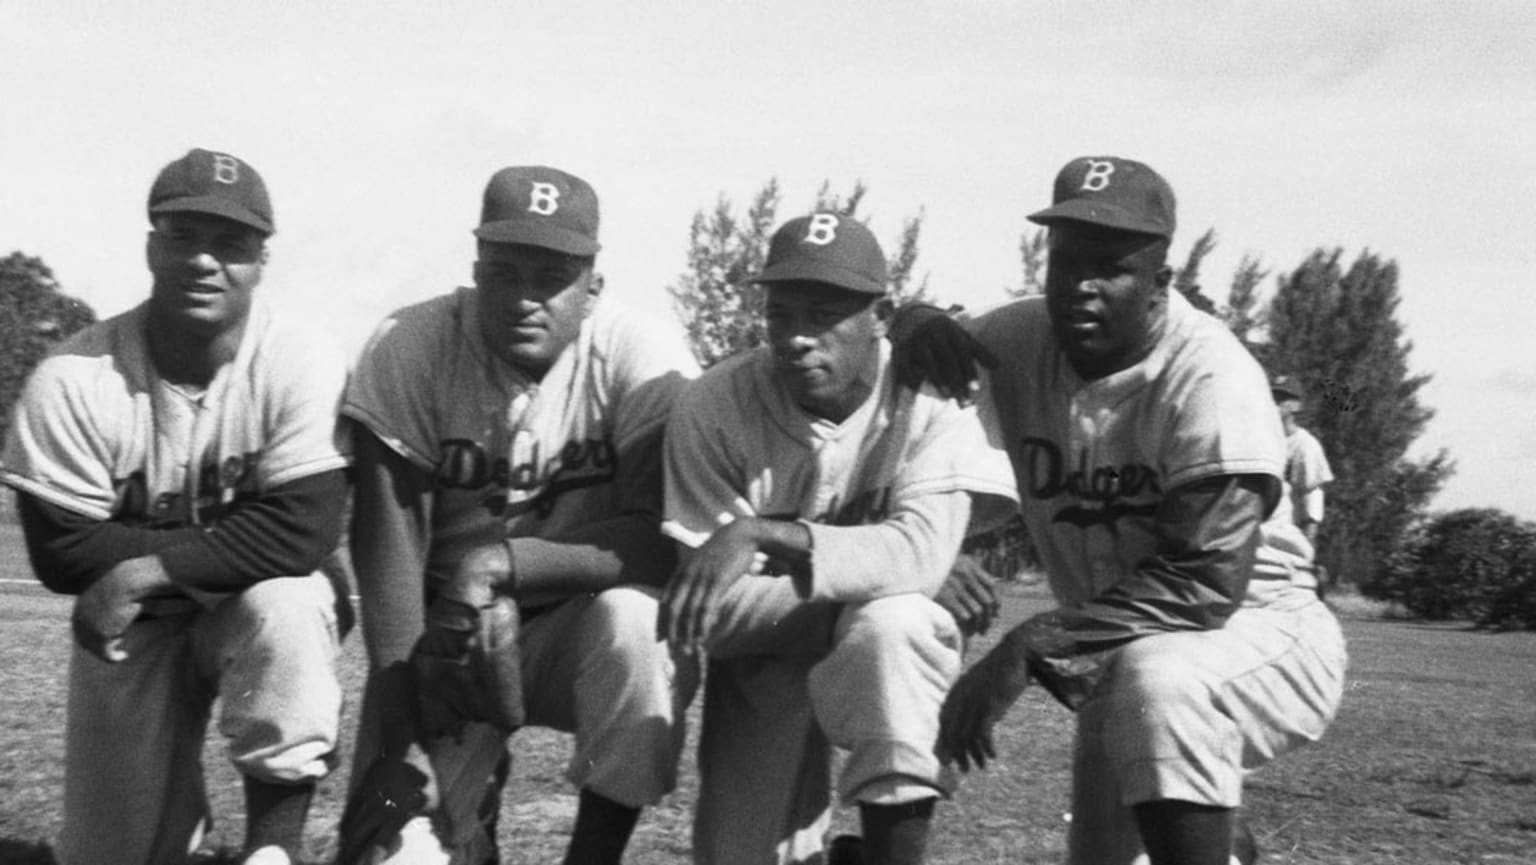 UCLA Alumni - On this day in 1947, UCLA Bruin Jackie Robinson broke the  color barrier in MLB when he debuted with the Brooklyn Dodgers. Read more  here